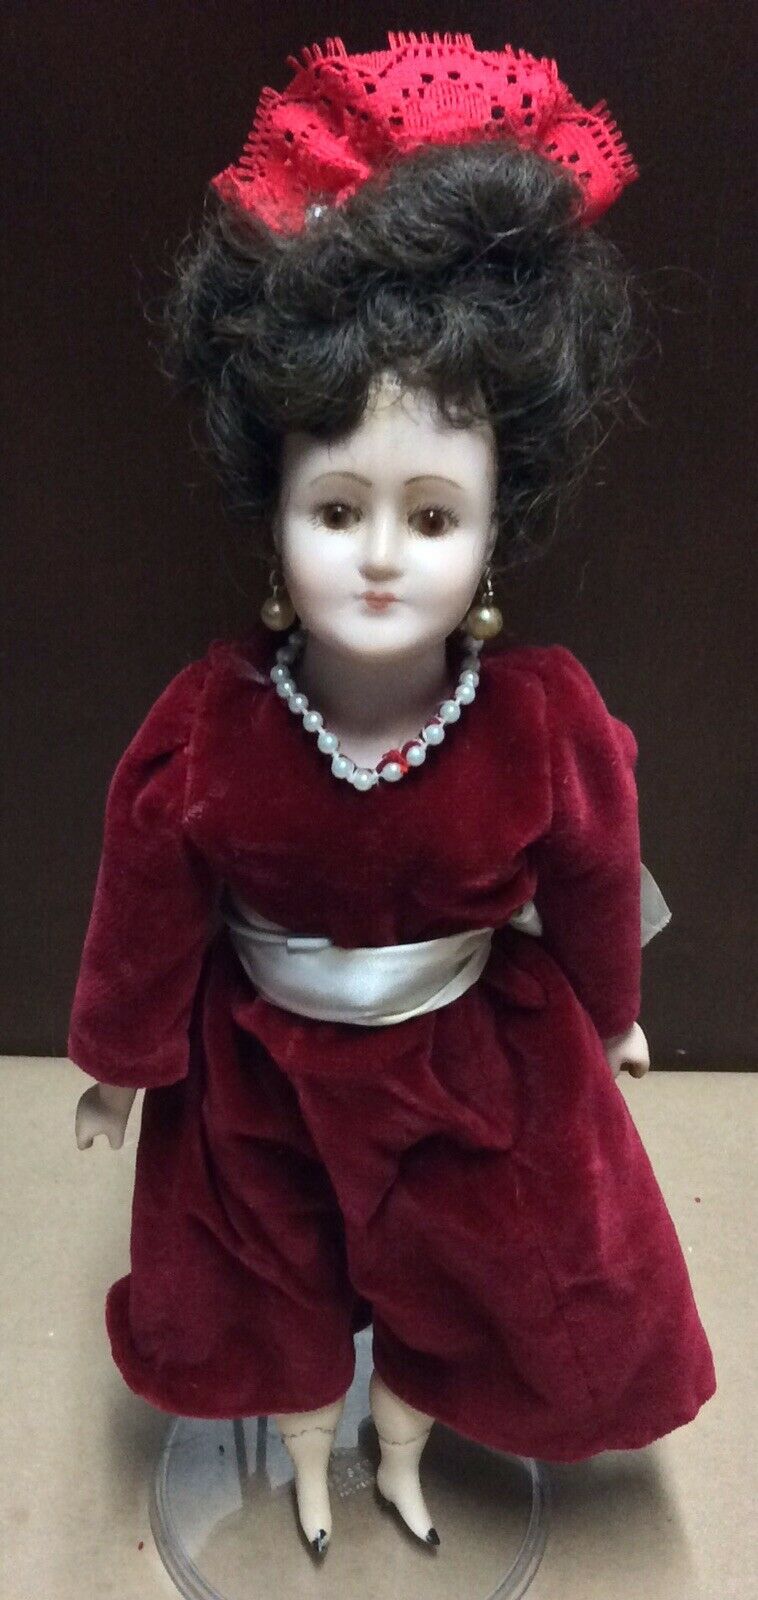 13” Vintage Bisque Head/arms/legs Cloth Body Brown Glass Eye Doll Victorian